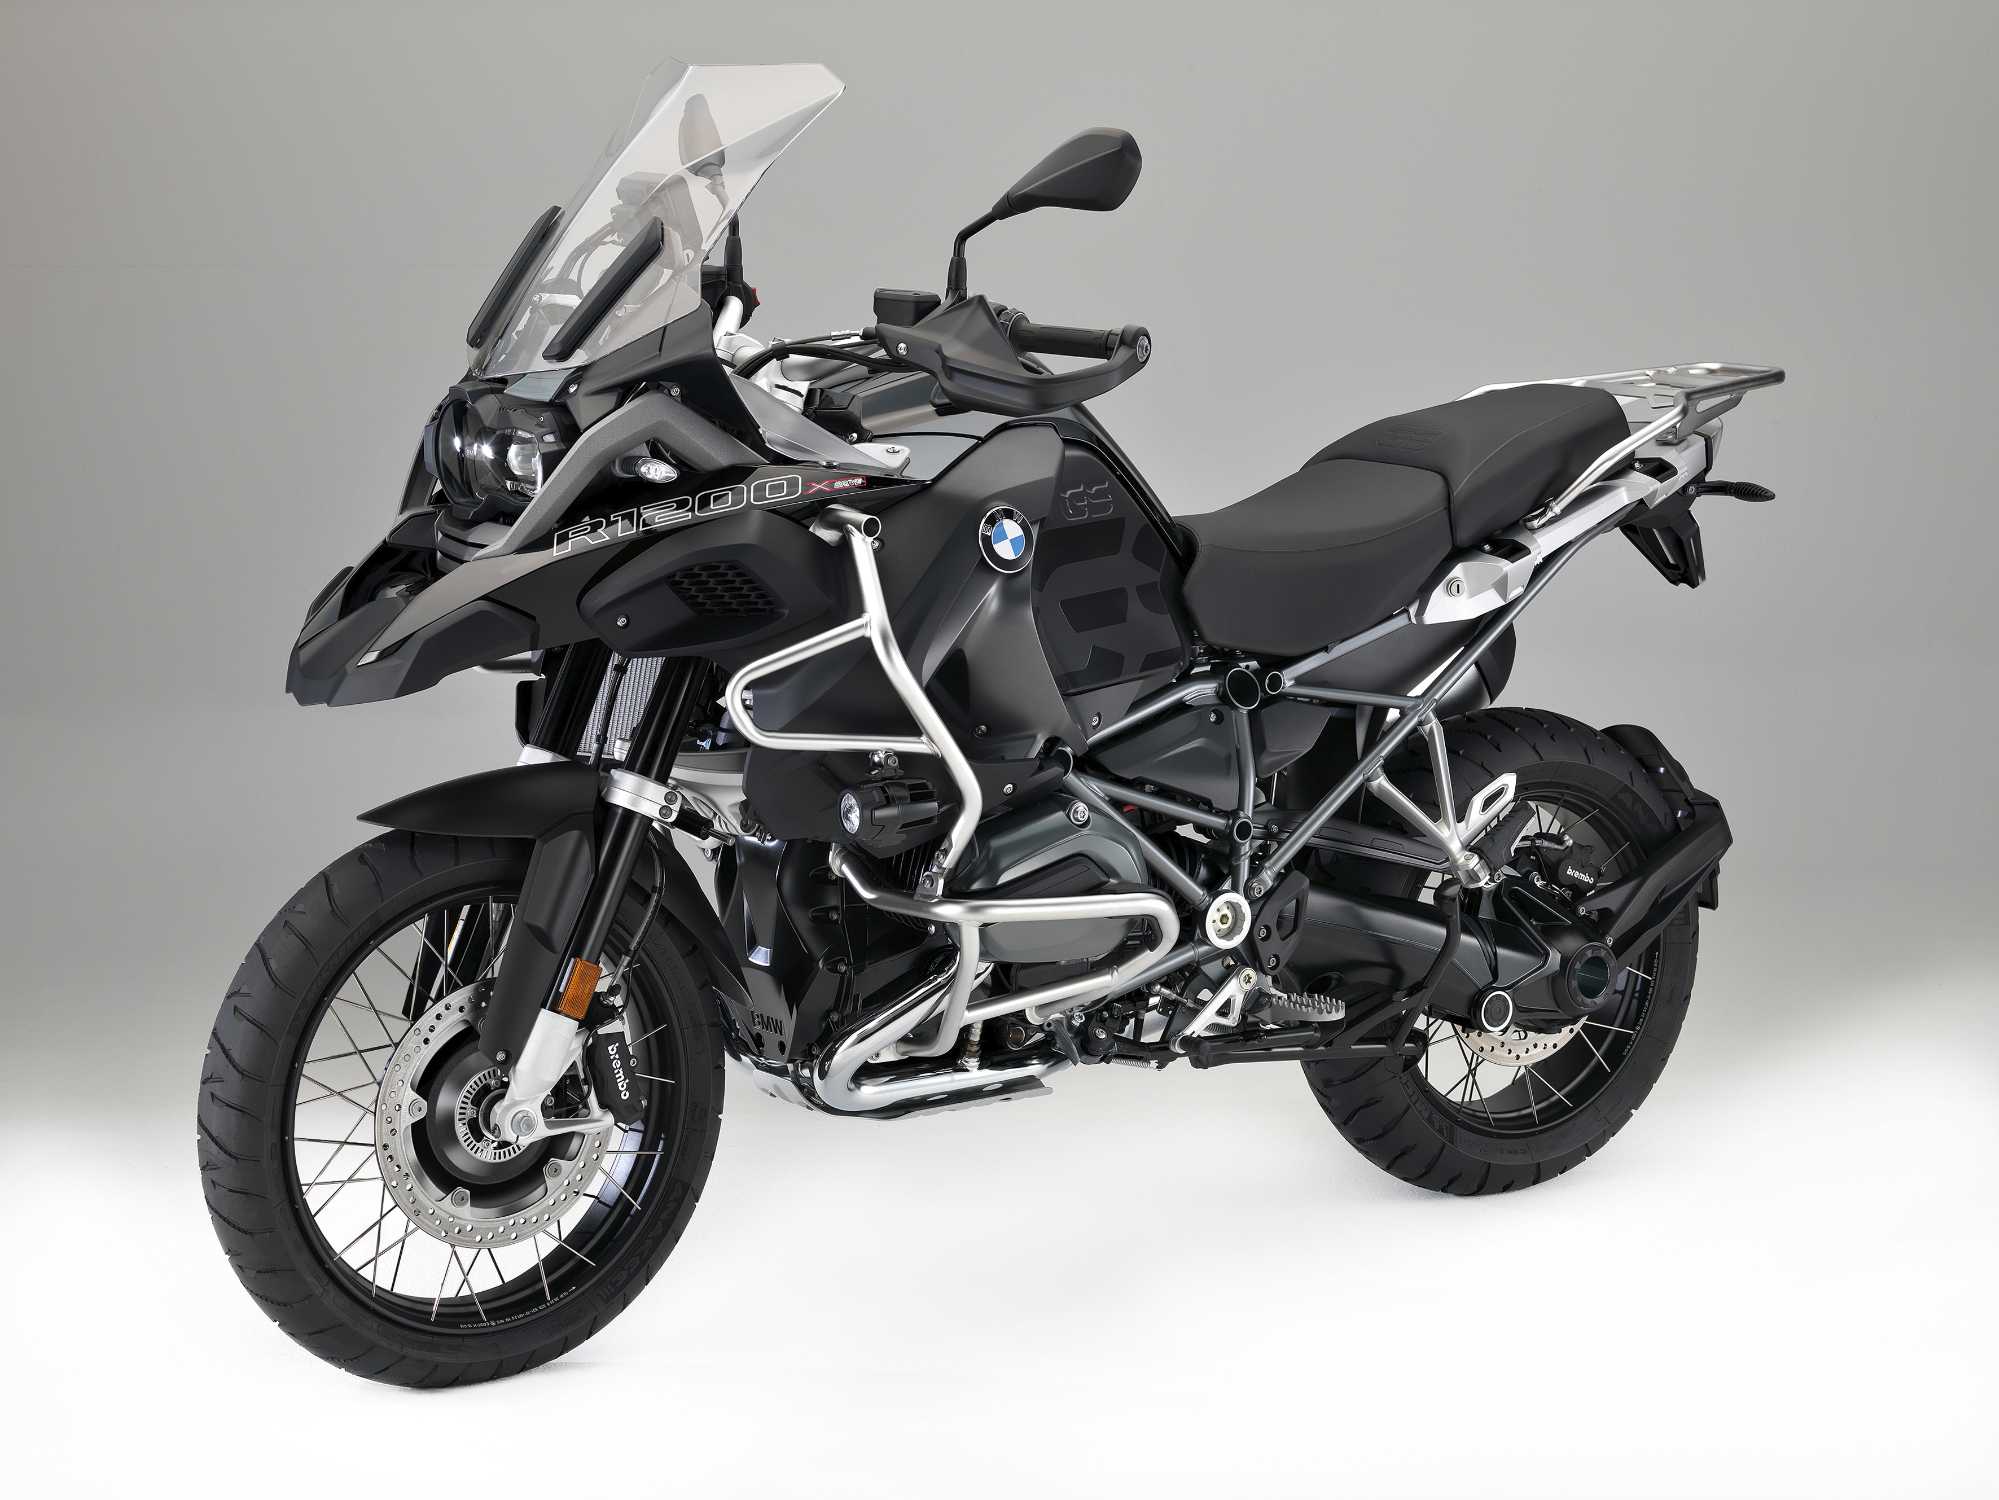 BMW Motorrad launches the R 1200 GS xDrive Hybrid. World premiere of